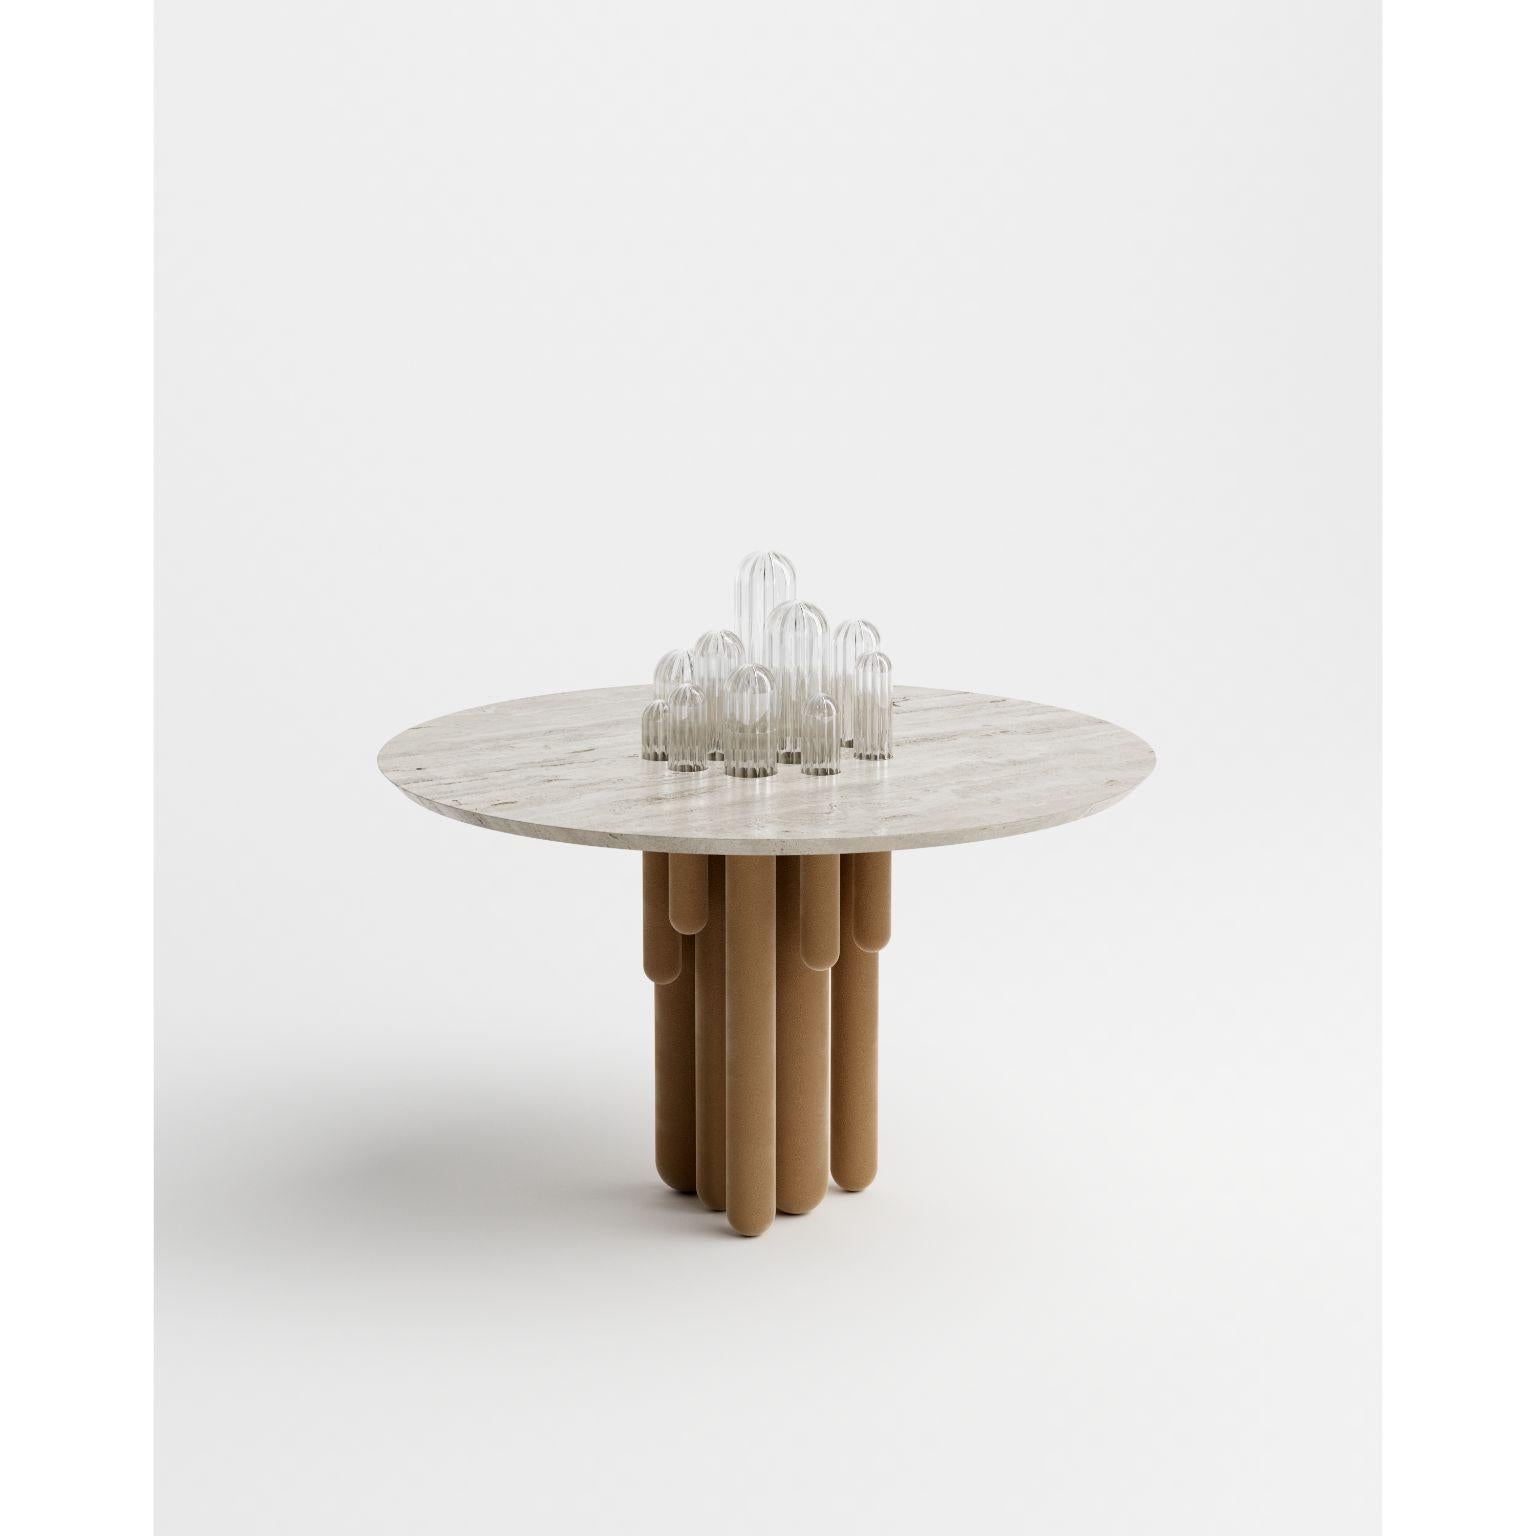 Cactus Velvet Round Table by Mickael Koska
Dimensions: Ø 120 x H 75 cm.
Materials: Velvet finish, metal, marble, and glass.

Also available in different colored metal bases. Available in round or oval shape. Top is available in marble, wood, or